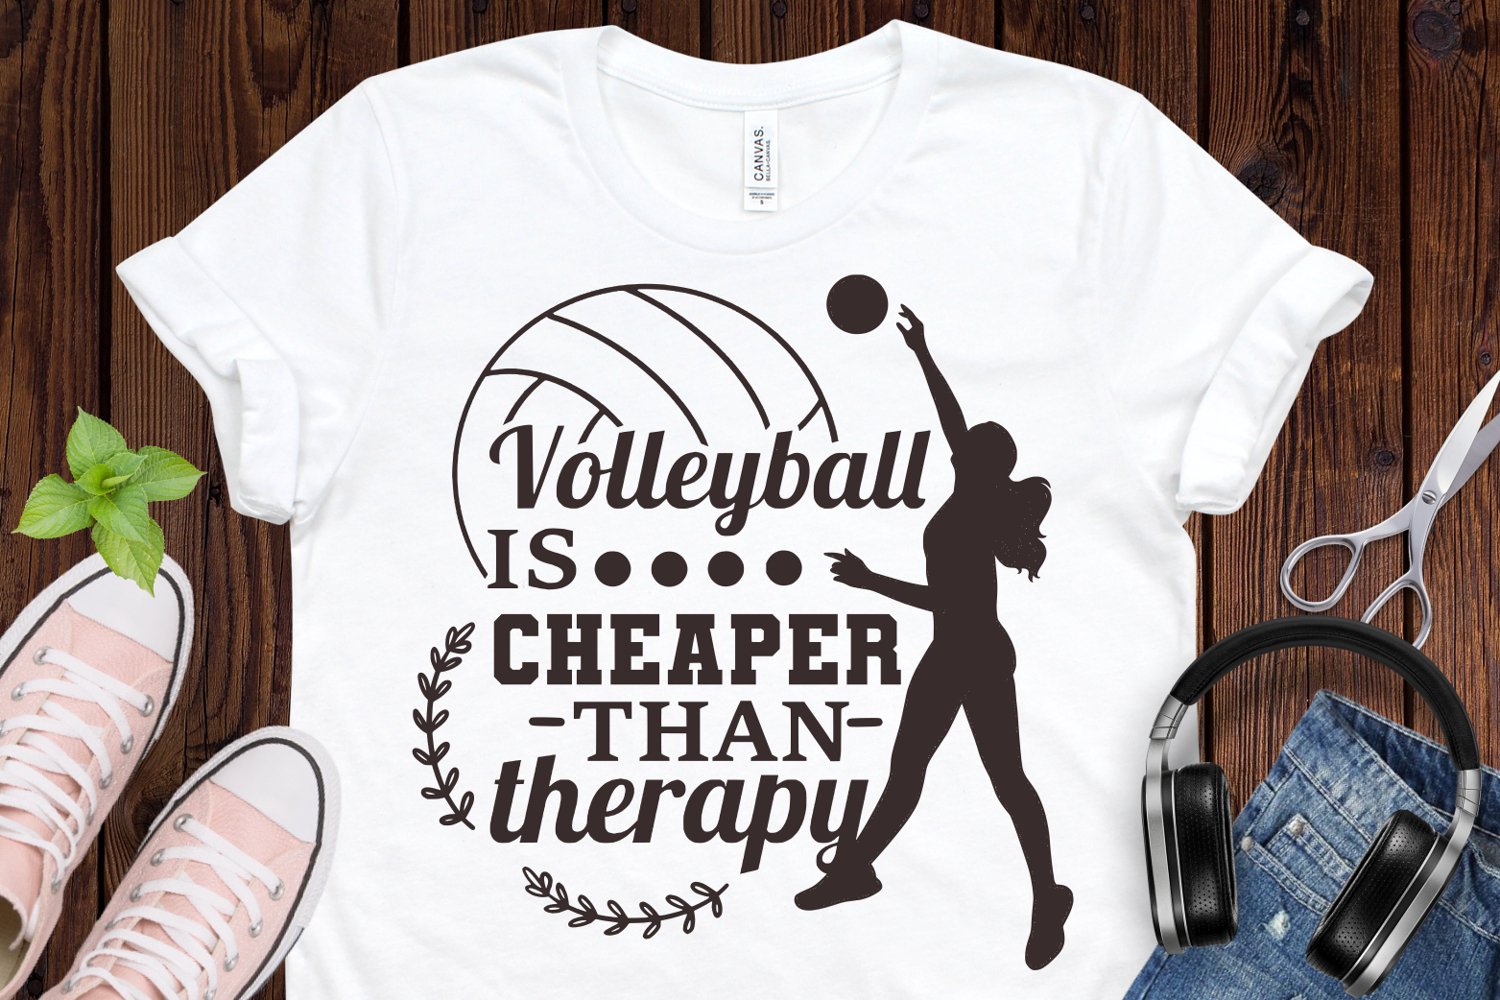 Volleyball is cheaper than therapy - t-shirt design.